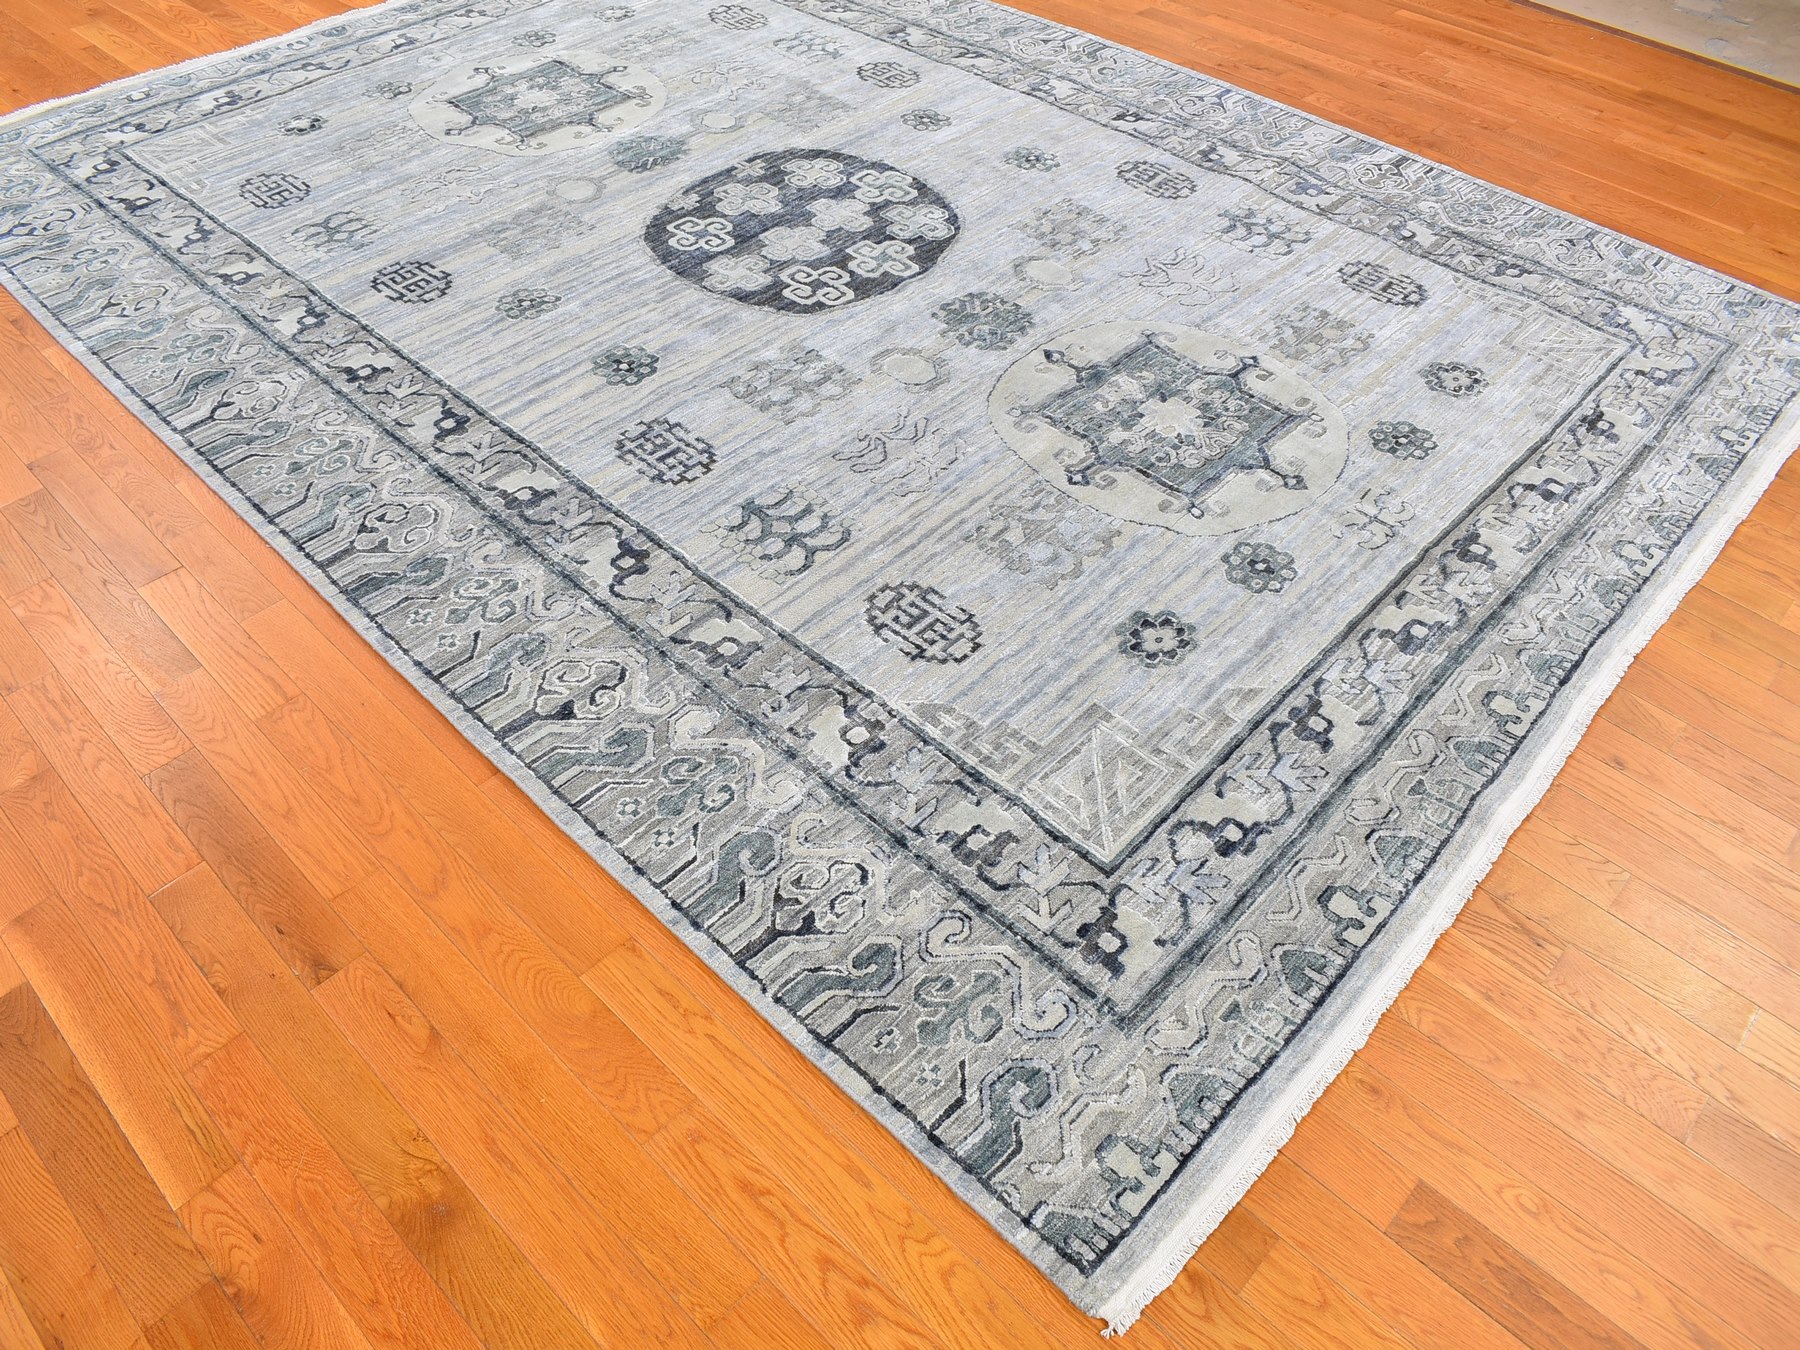 Wool and Silk Rugs LUV534330